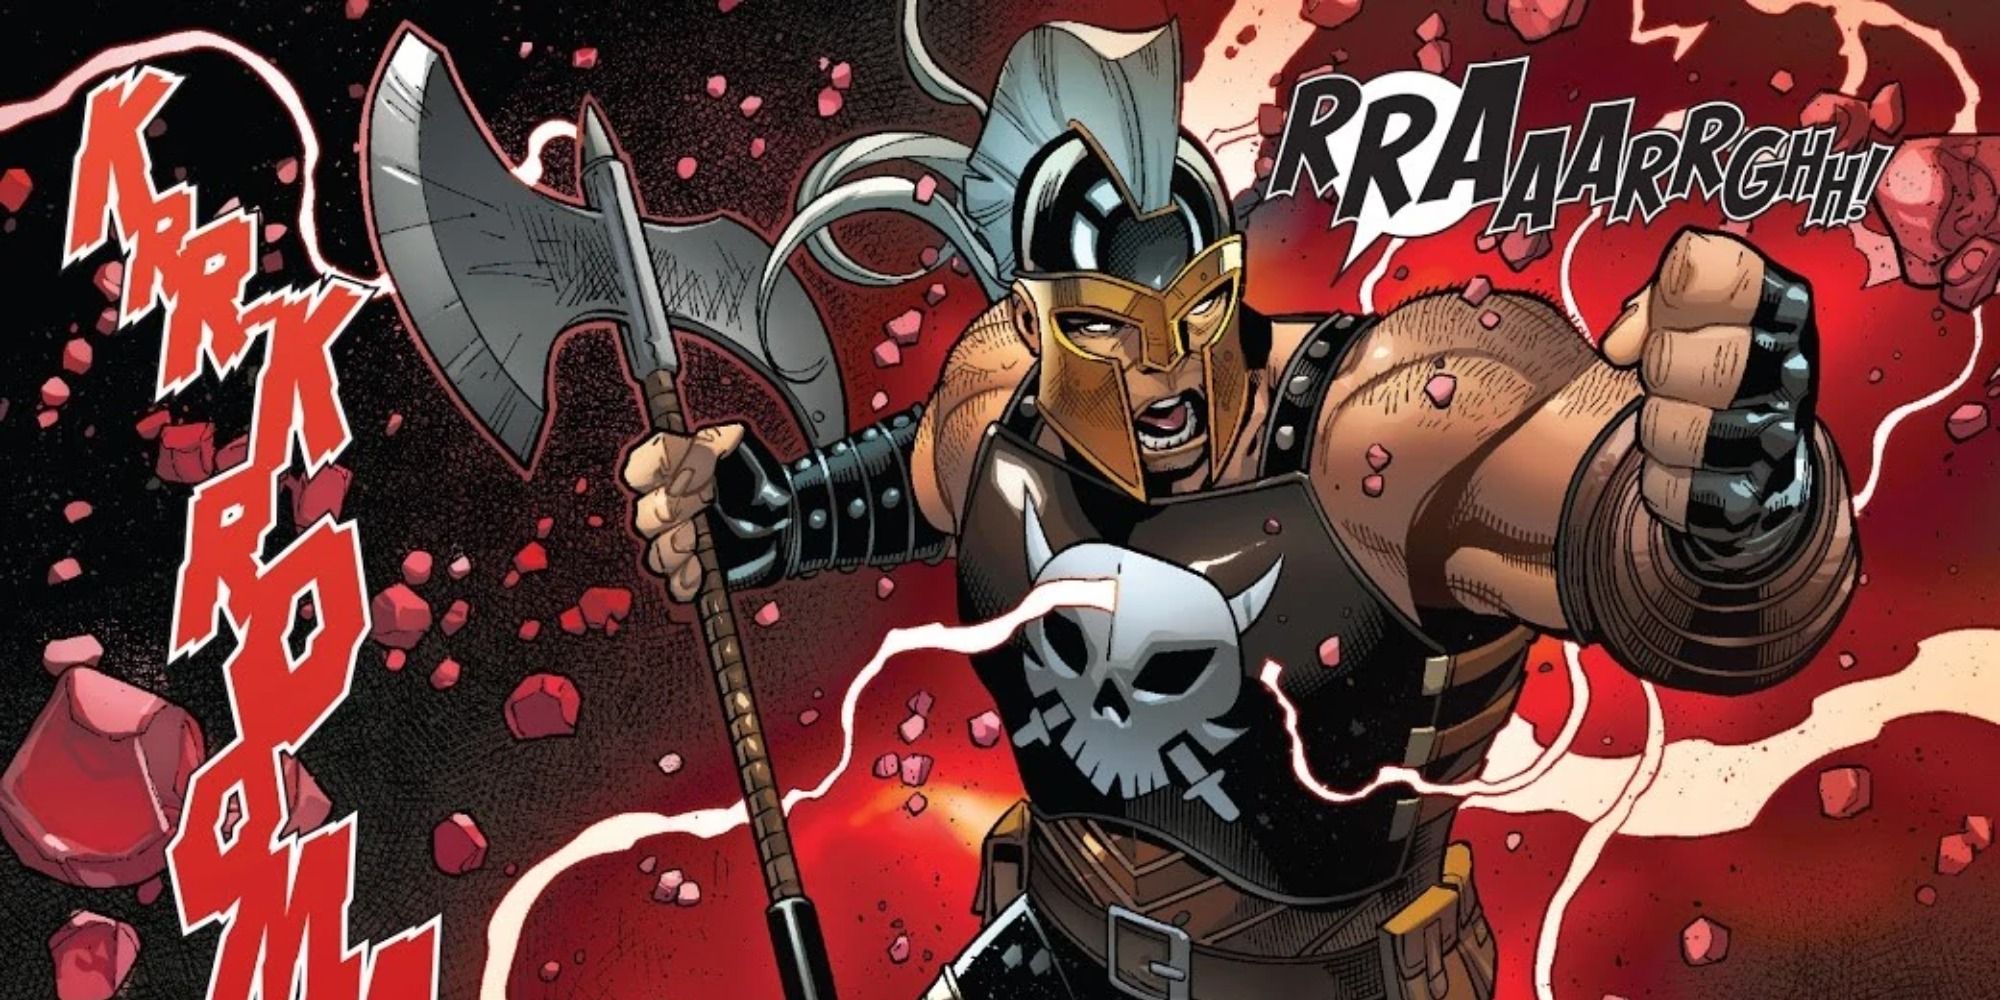 Ares attacks in Marvel Comics.